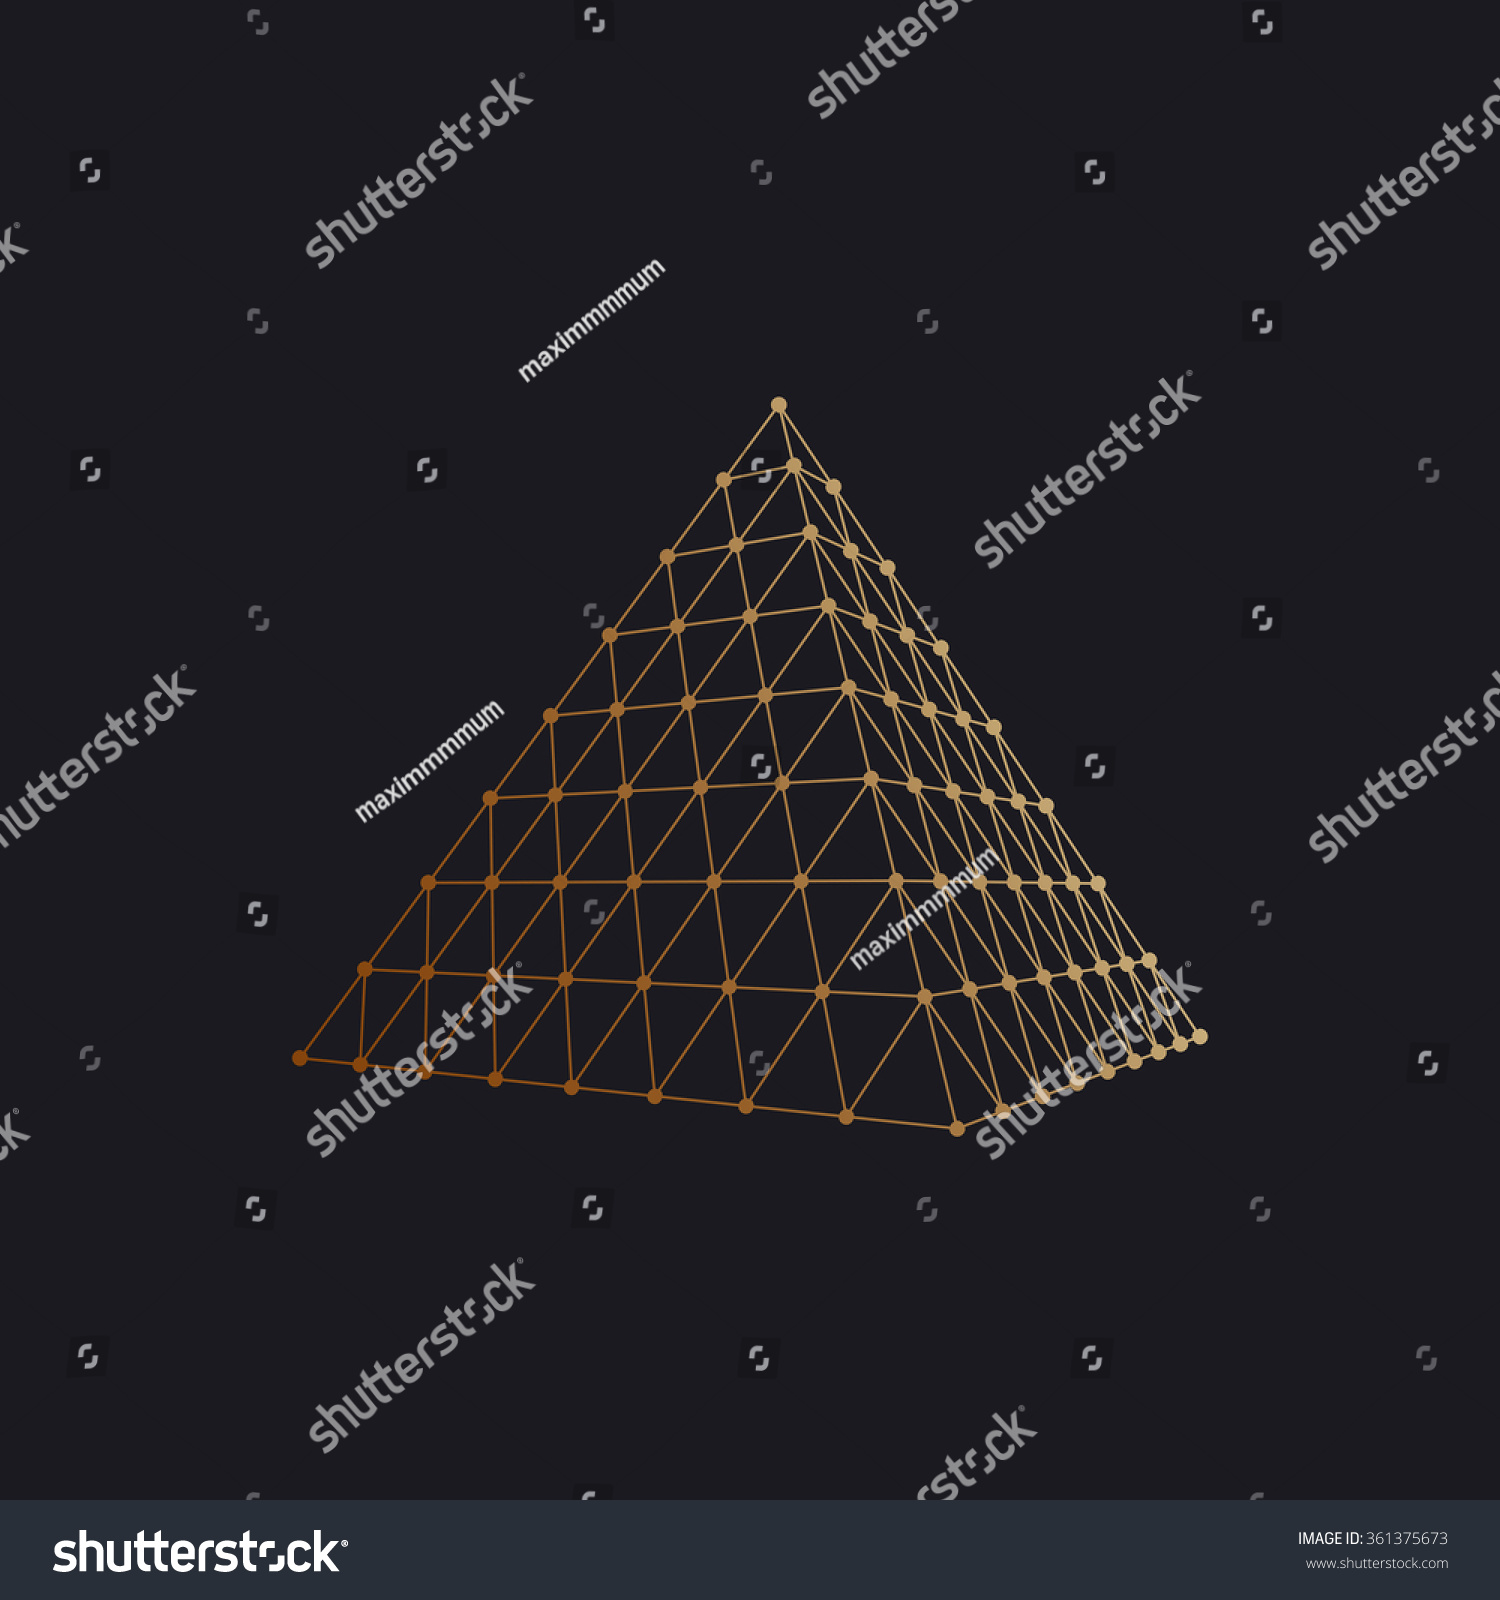 Polygonal pyramid. Vector illustration with - Royalty Free Stock Vector ...